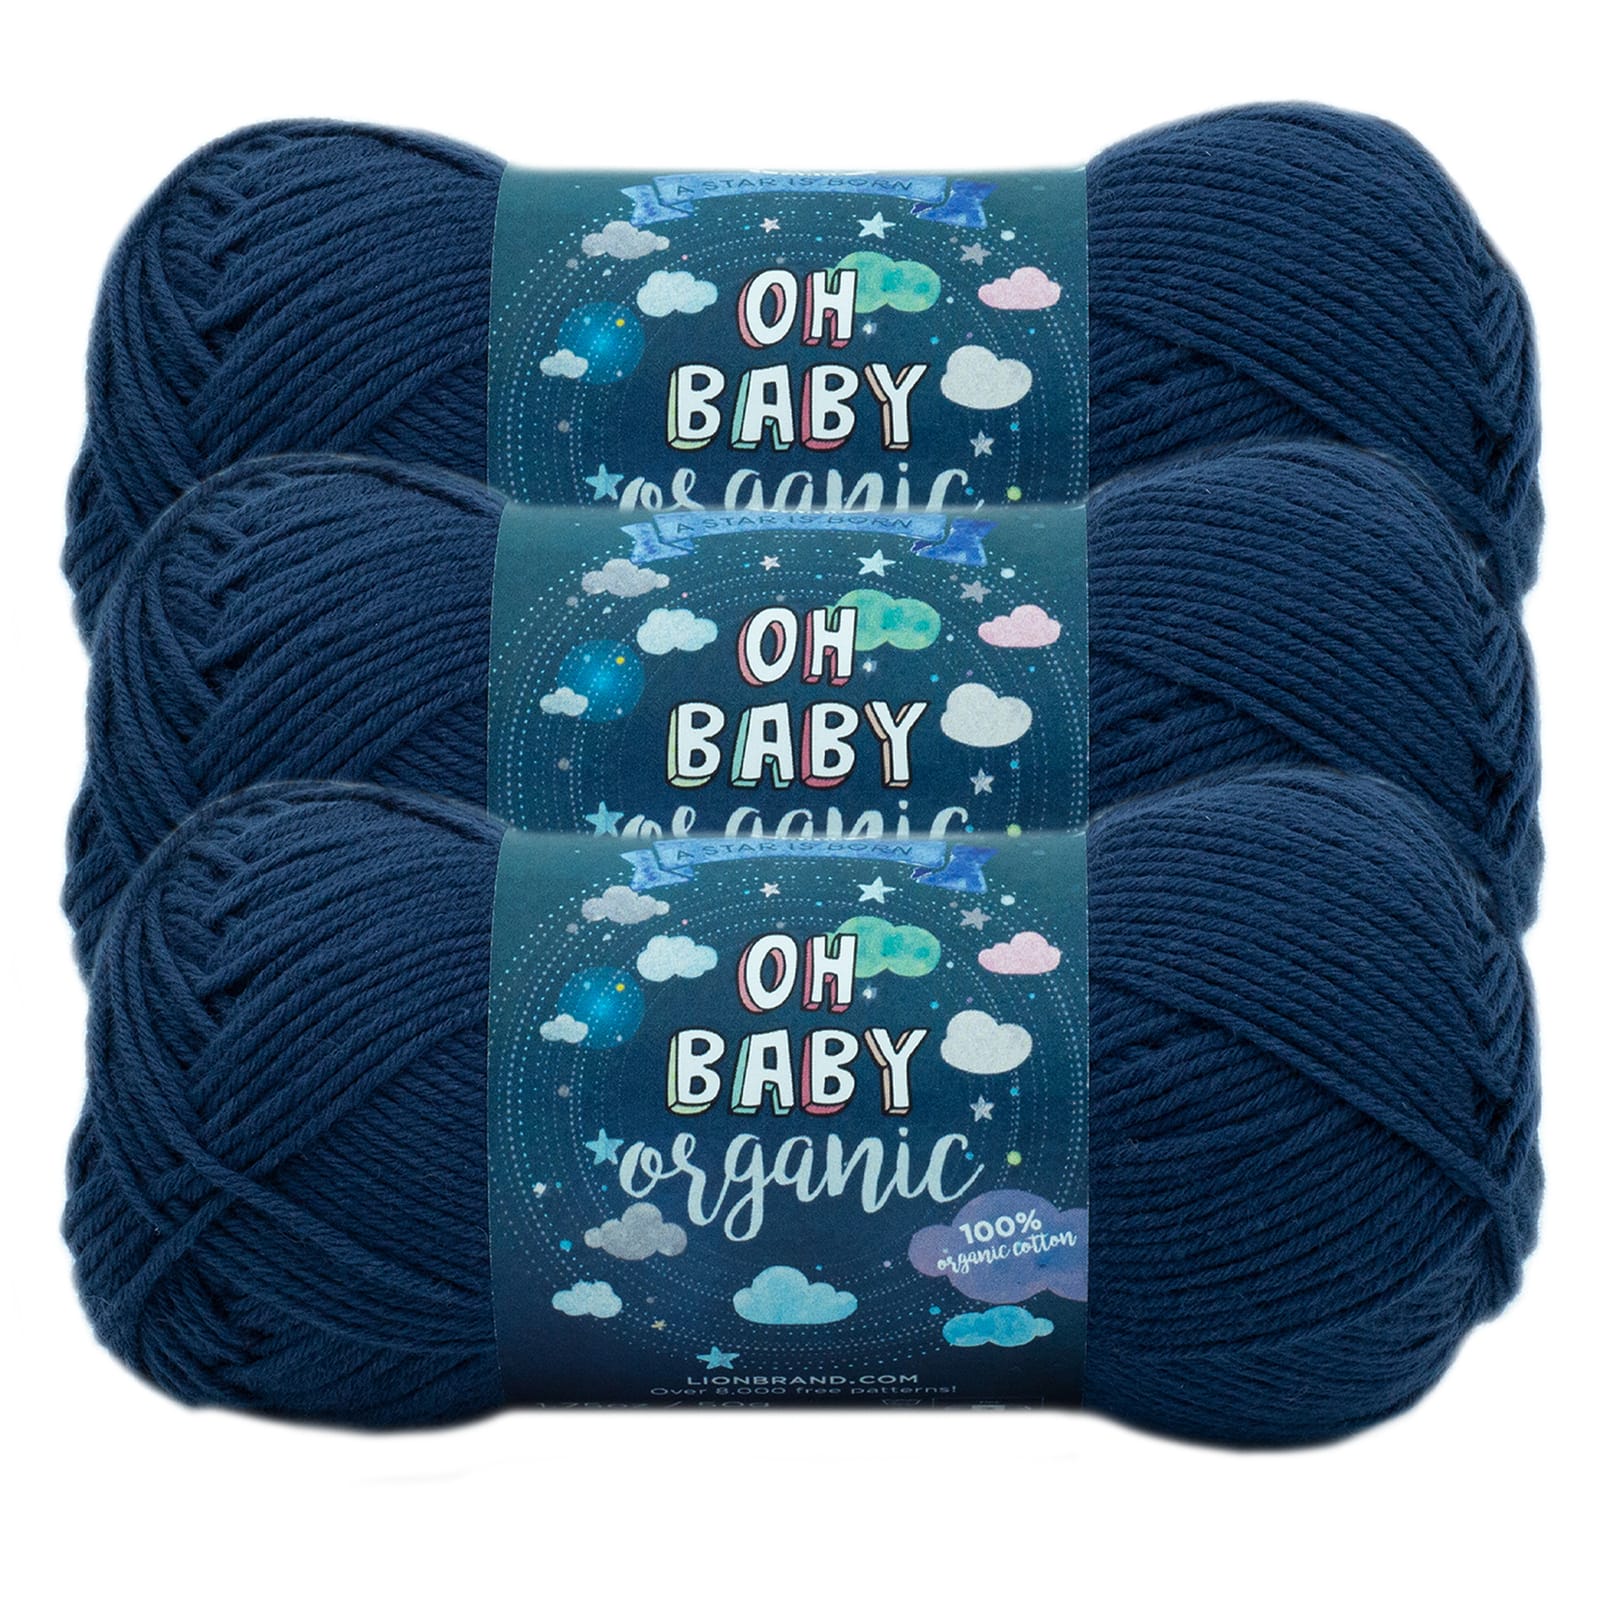 (3 Pack) Lion Brand Yarn 173-106 Oh Baby Yarn, Turquoise